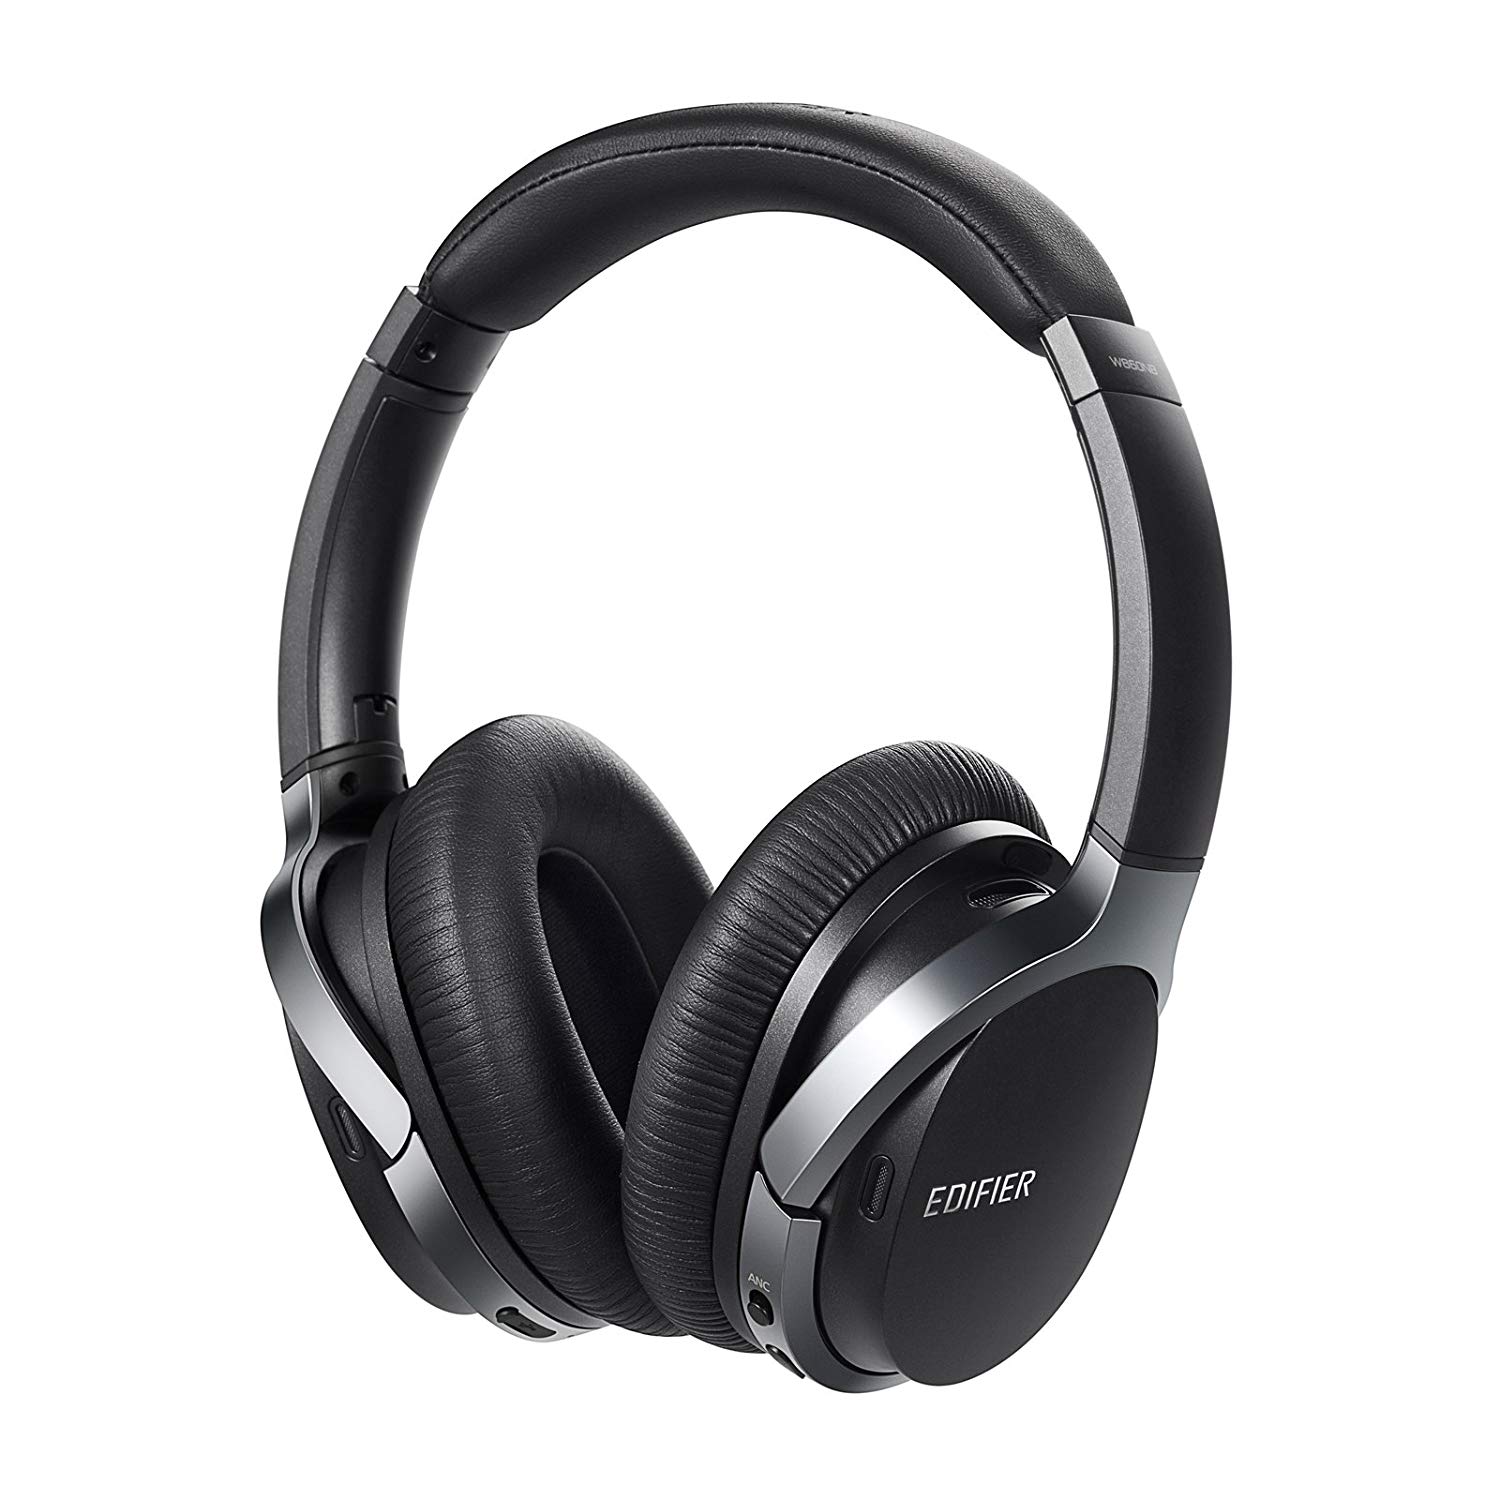 Edifier W860NB headphones product image against white background.